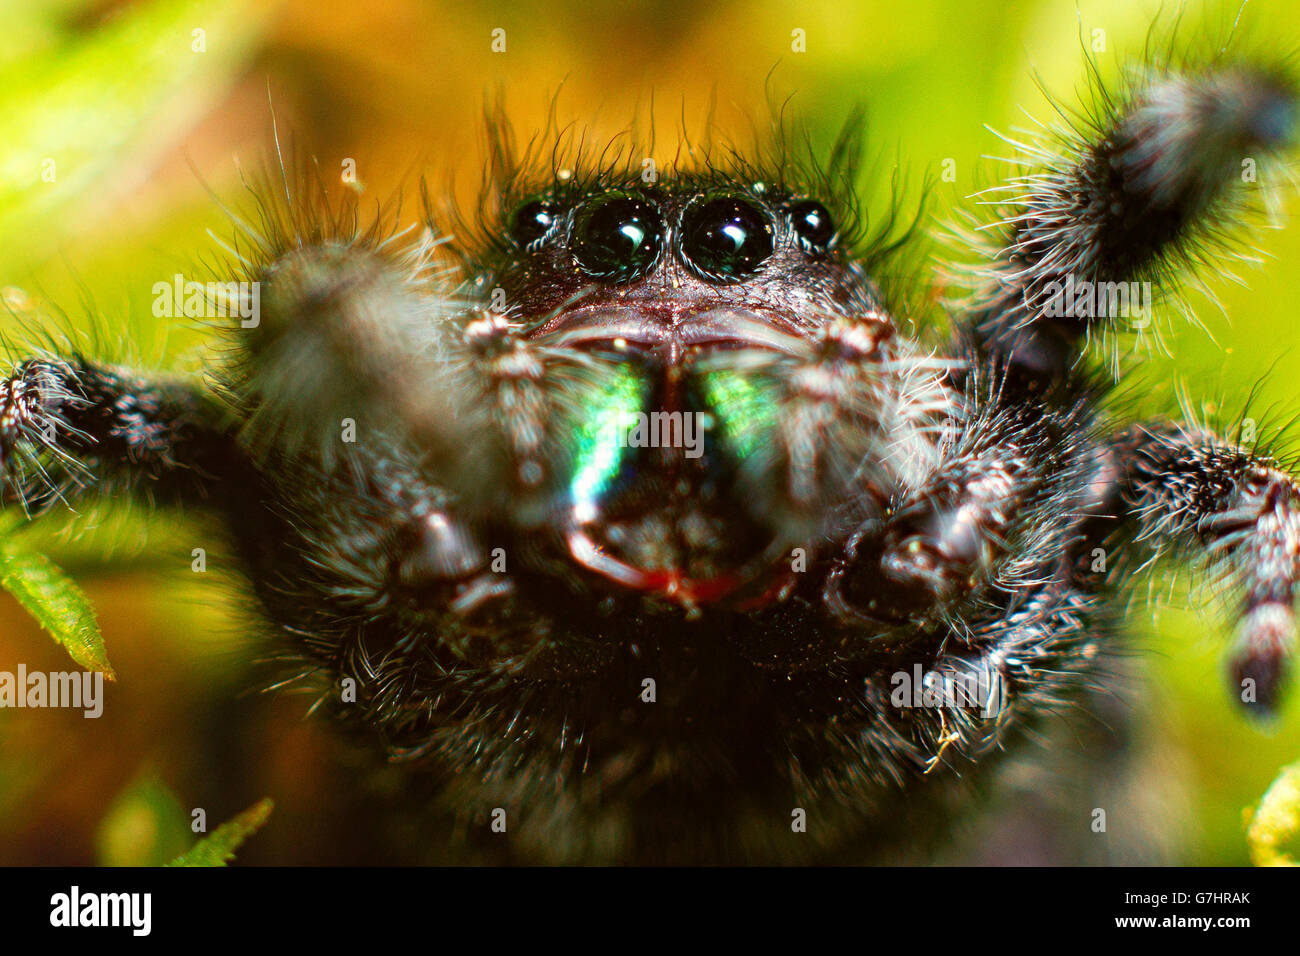 Phidippus audax jumping spider with red fangs reaching out Stock Photo